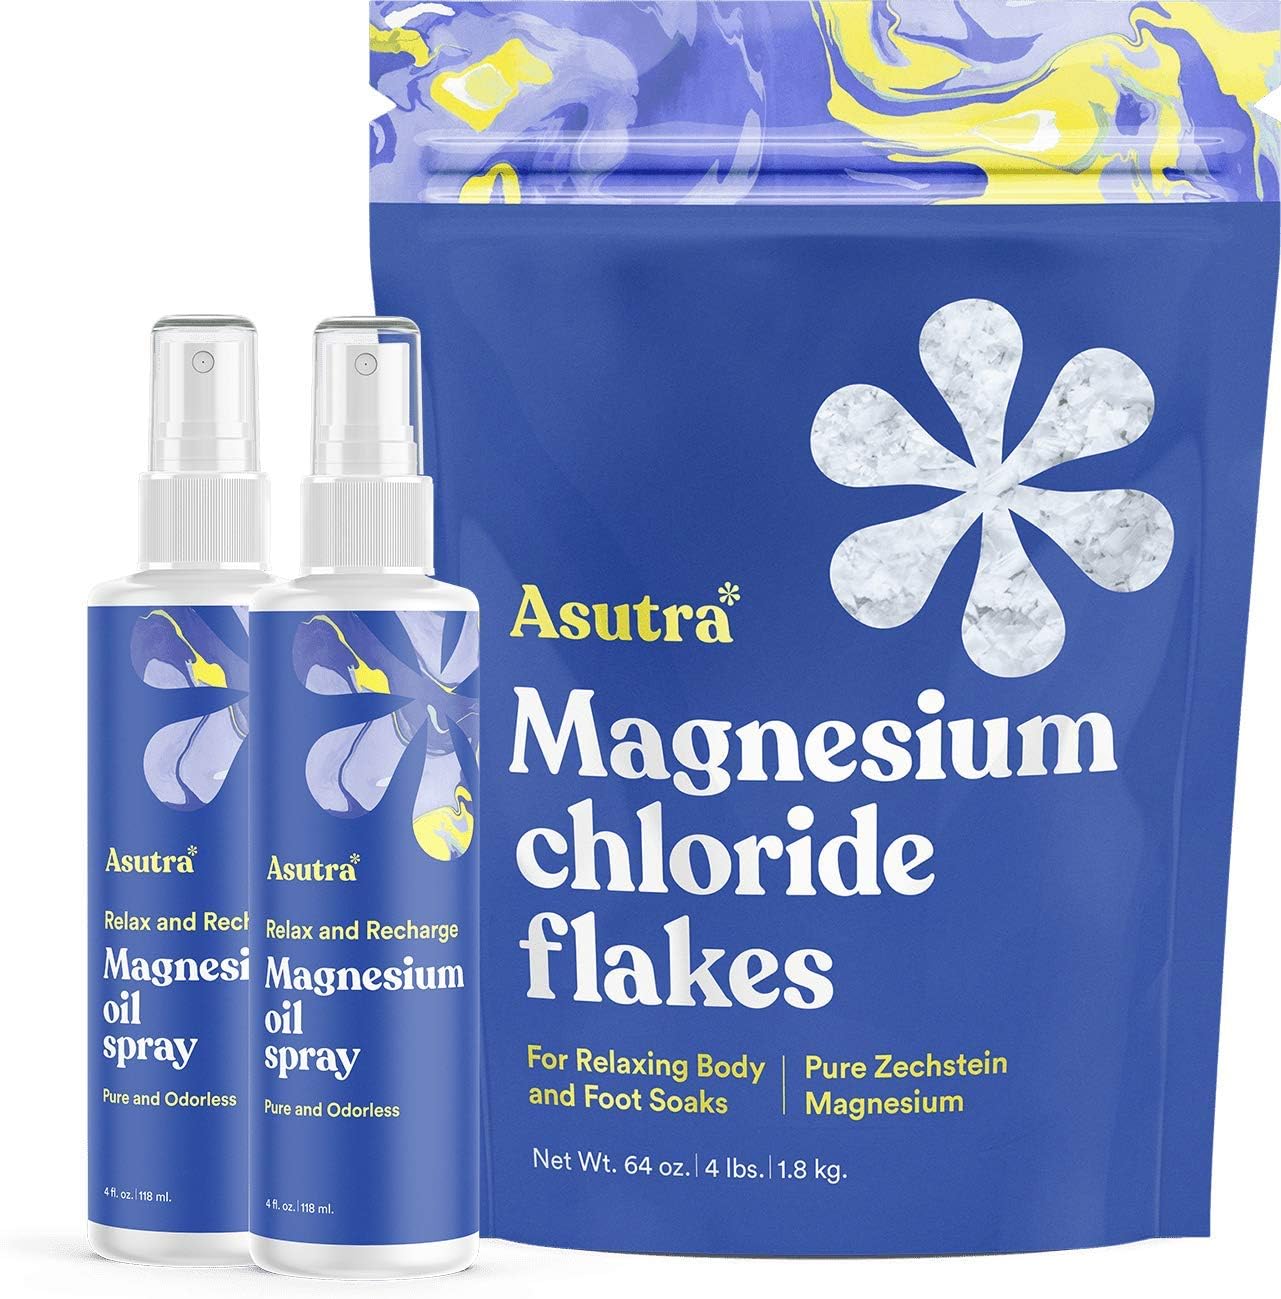 ASUTRA Value Bundle of Topical Magnesium Chloride Oil Sprays (8 oz Total) + Magnesium Chloride Bath Flakes (4lbs Total) | Pure Zechstein